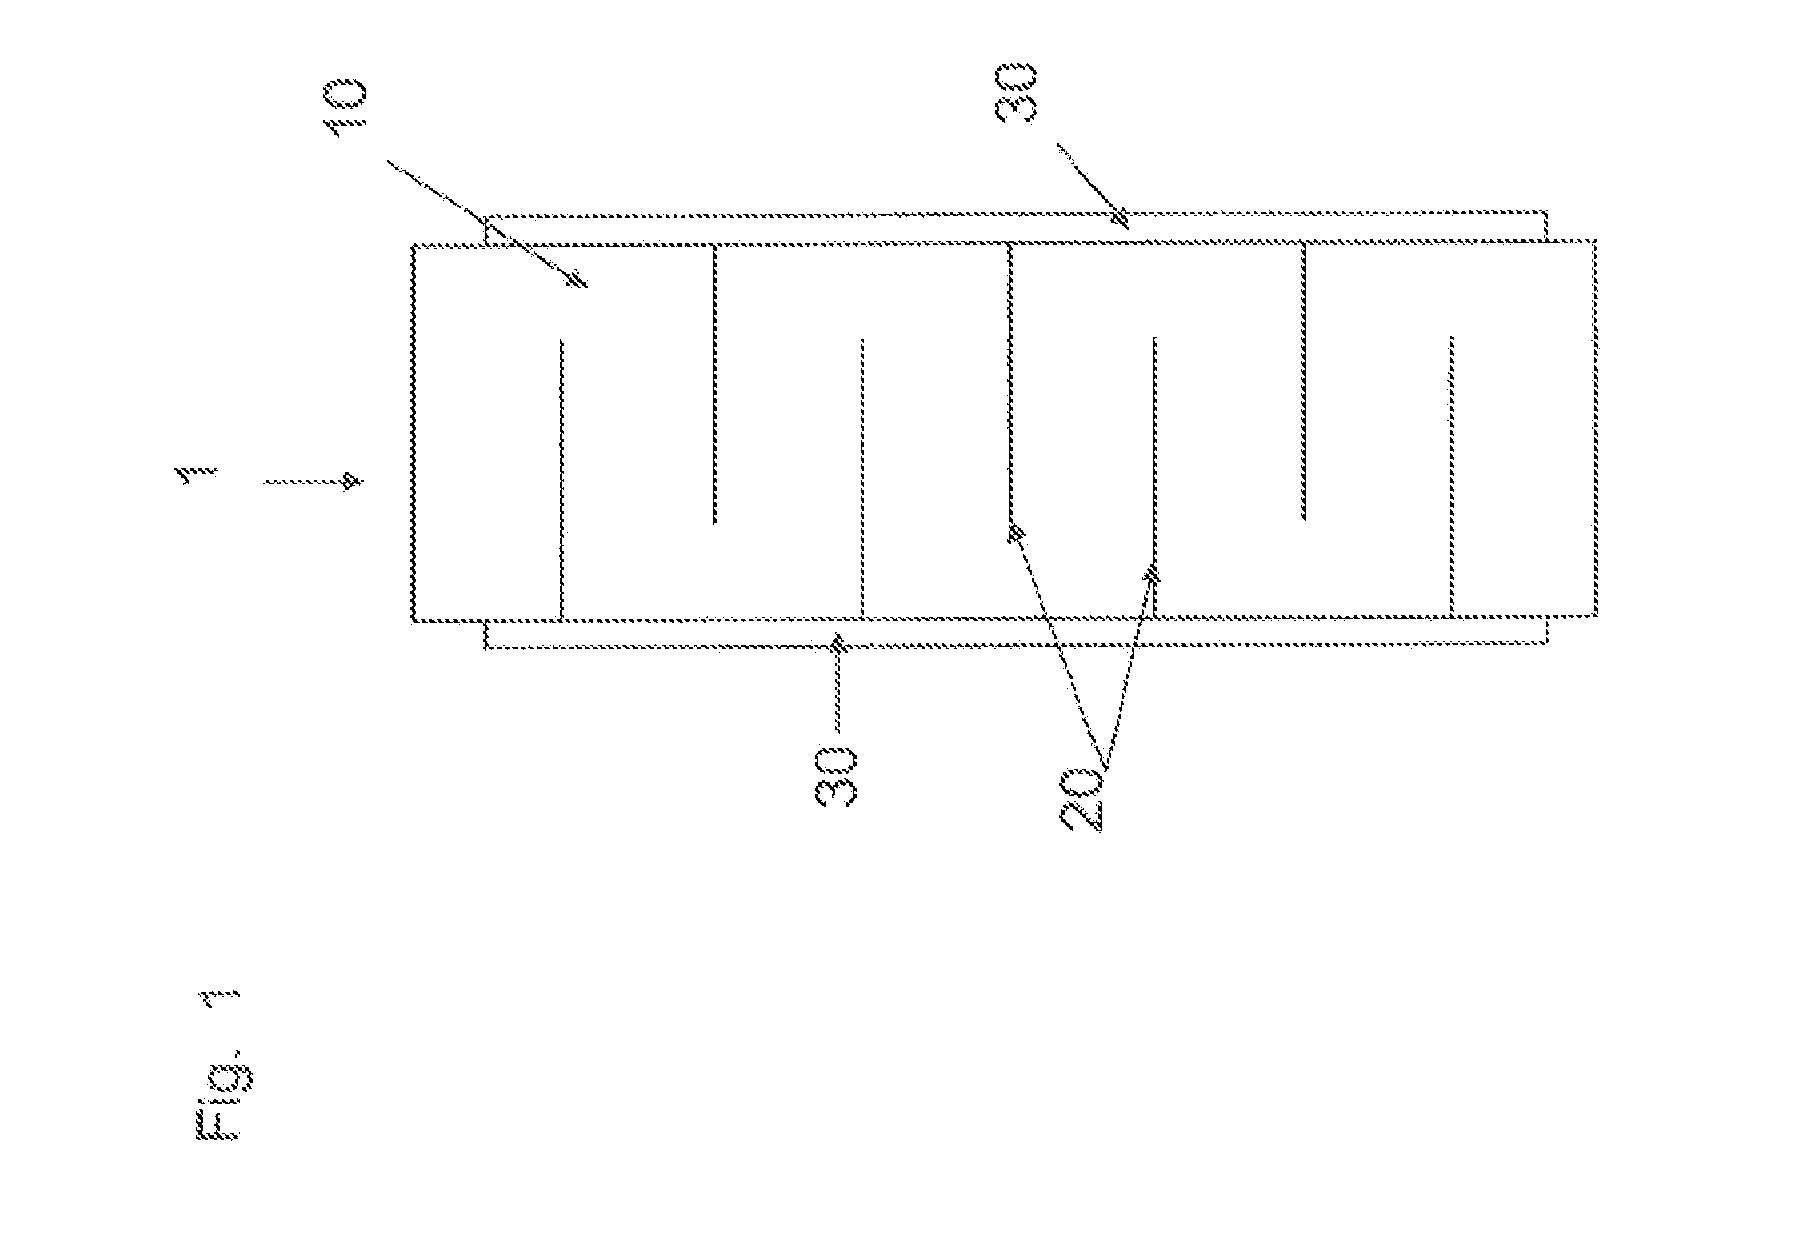 Piezoelectric Component and Method for Producing a Piezoelectric Component